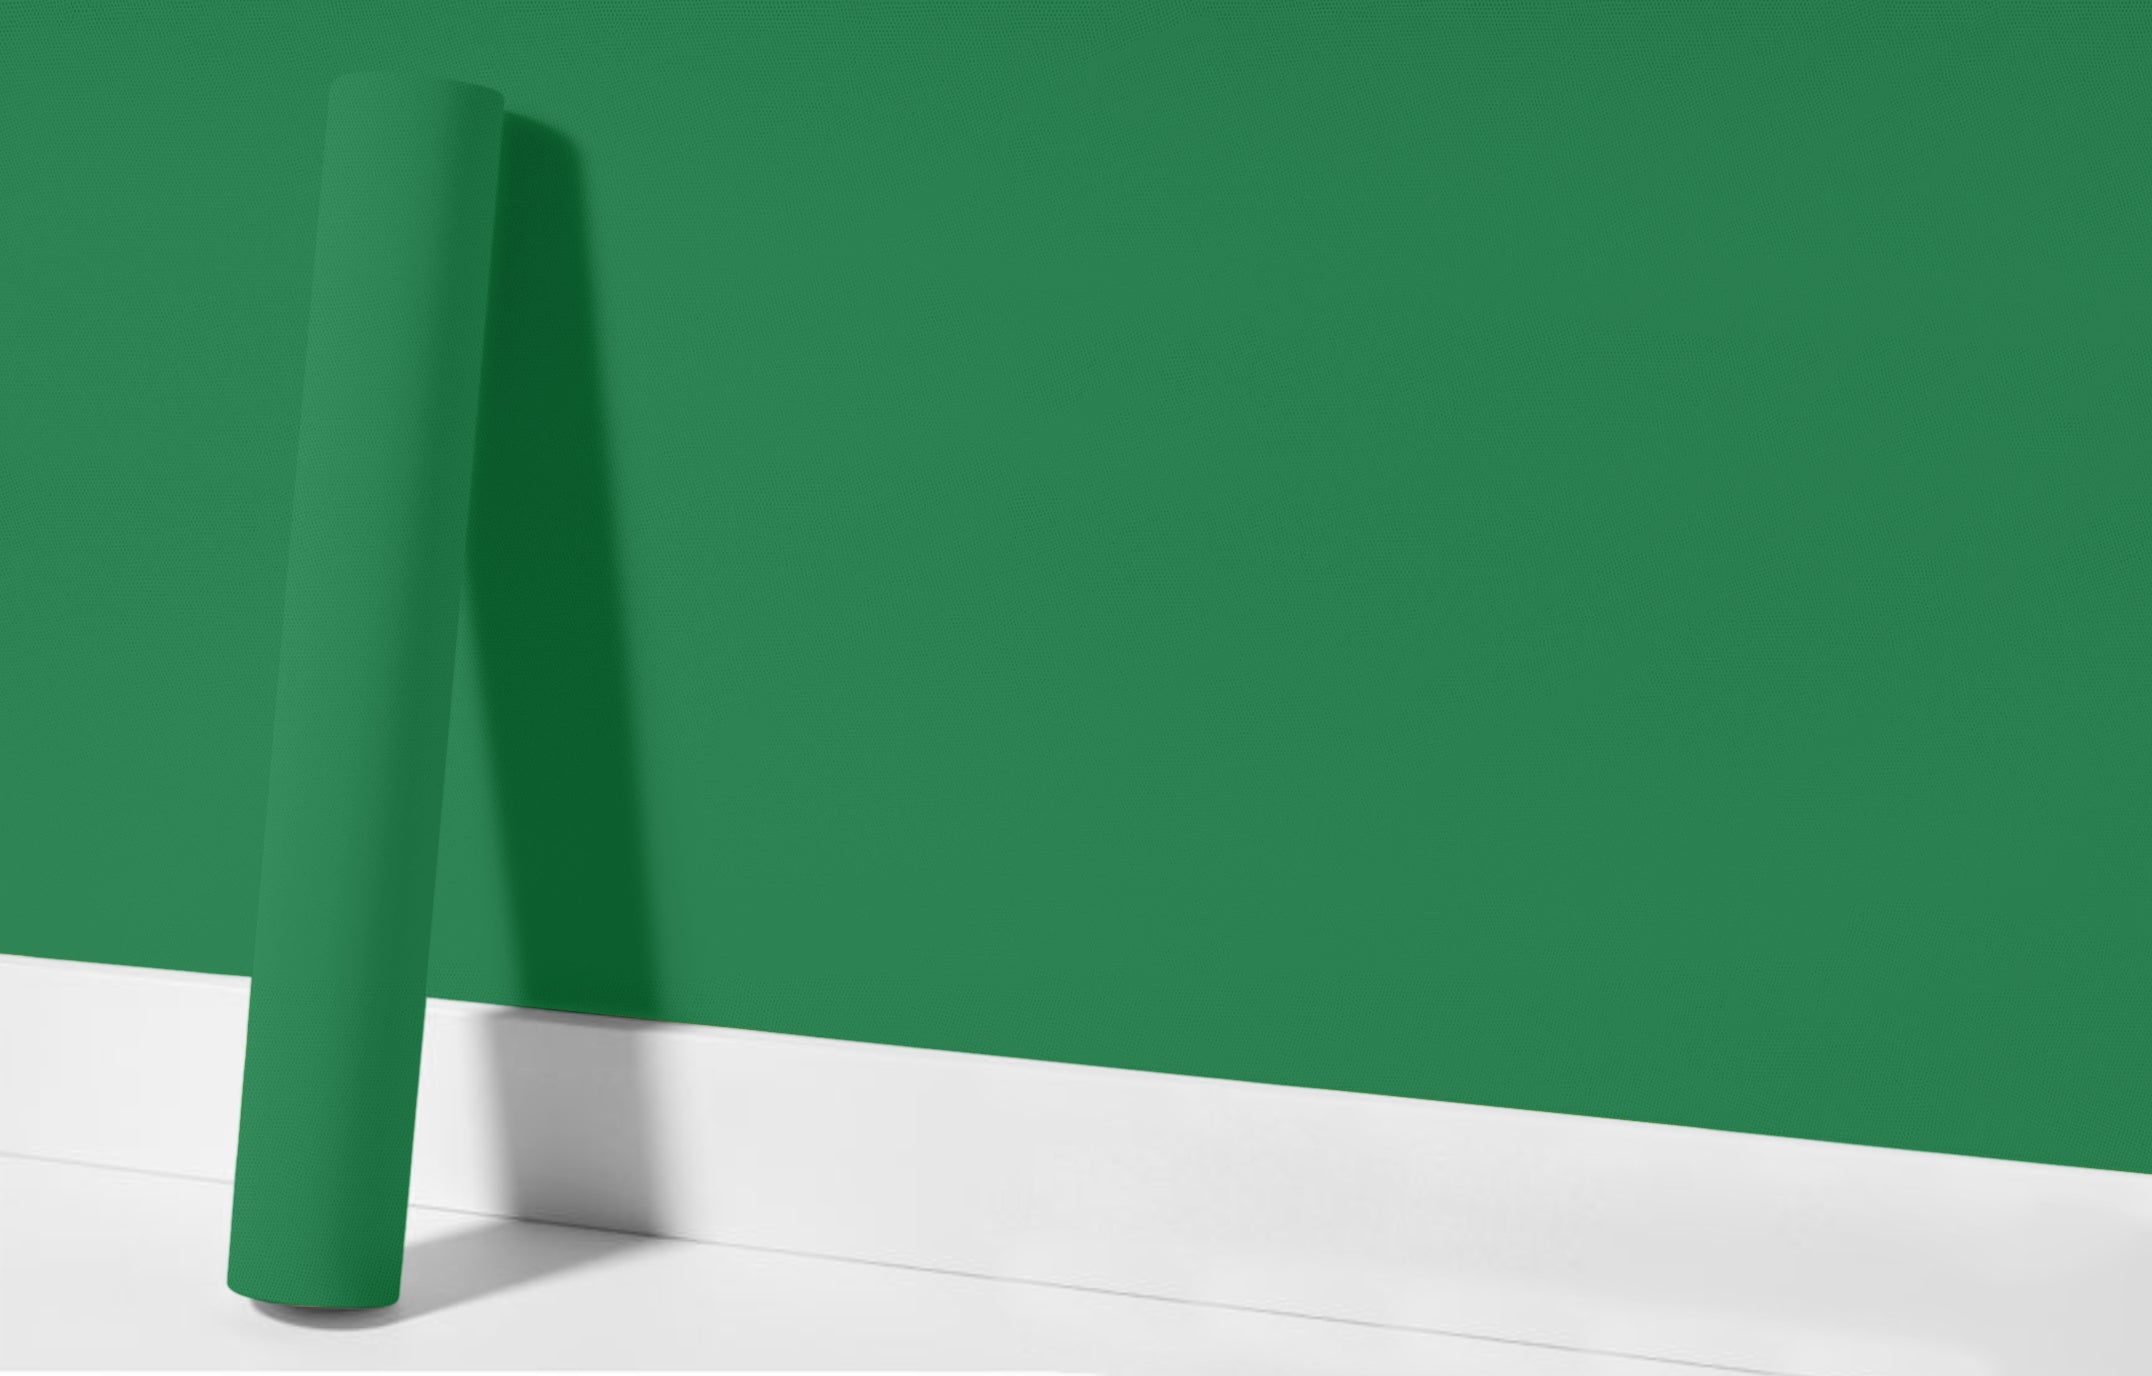 Peel & Stick Removable Re-usable Paint - Color RAL 6032 Signal Green - offRAL™ - RALRAW LLC, USA